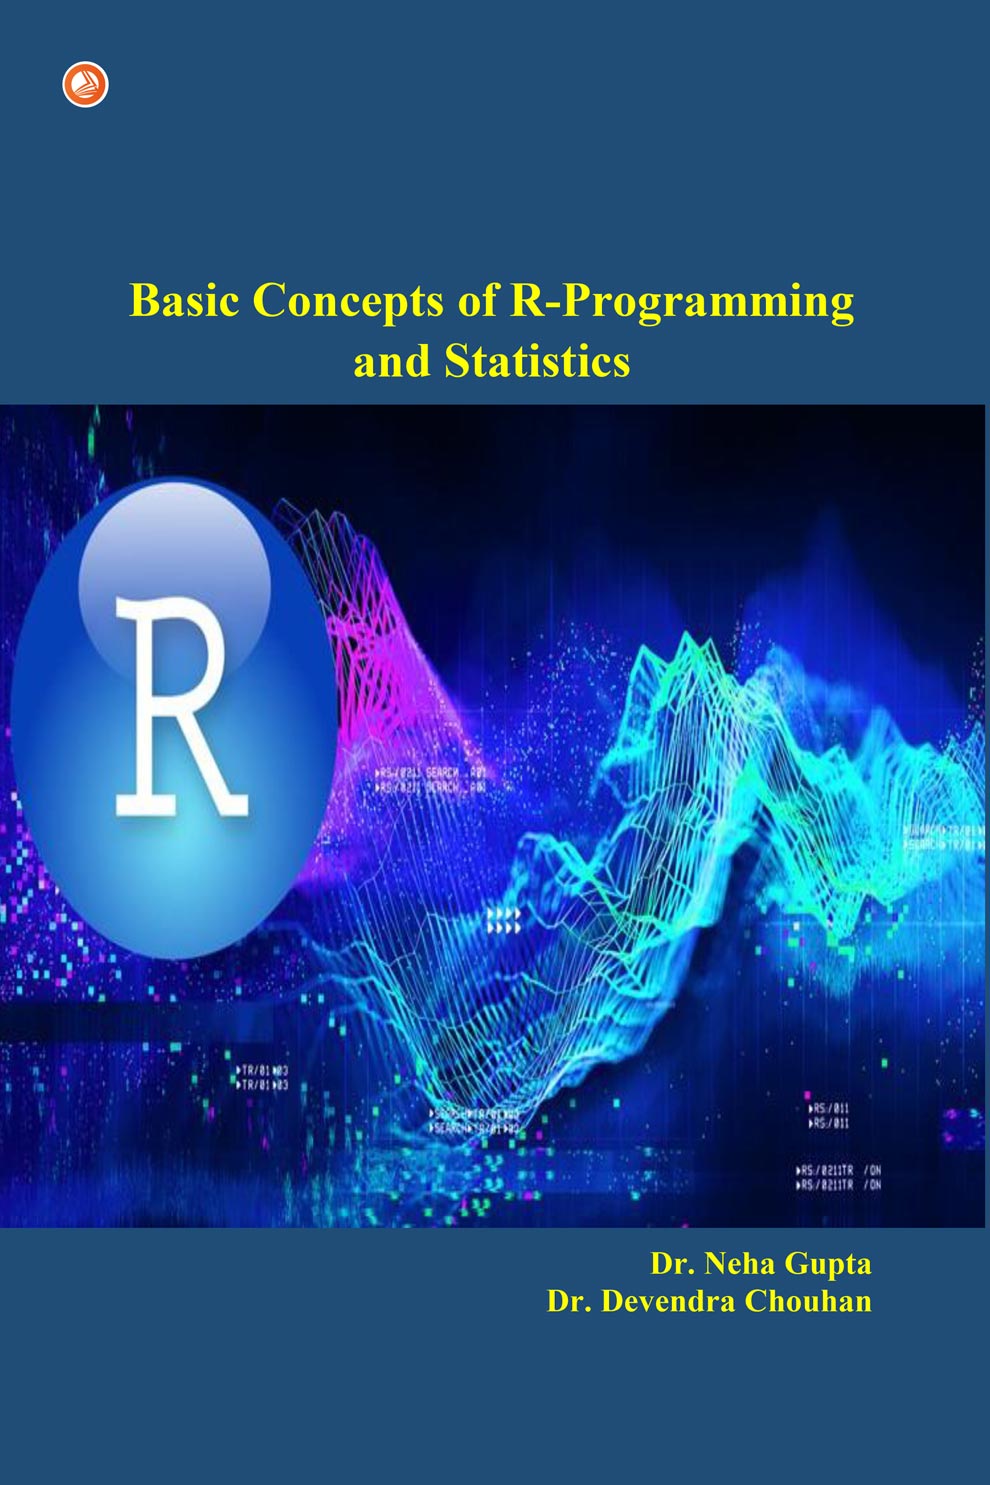 of　Statistics　Basic　R-Programming　Wissen　Concepts　and　Bookstore